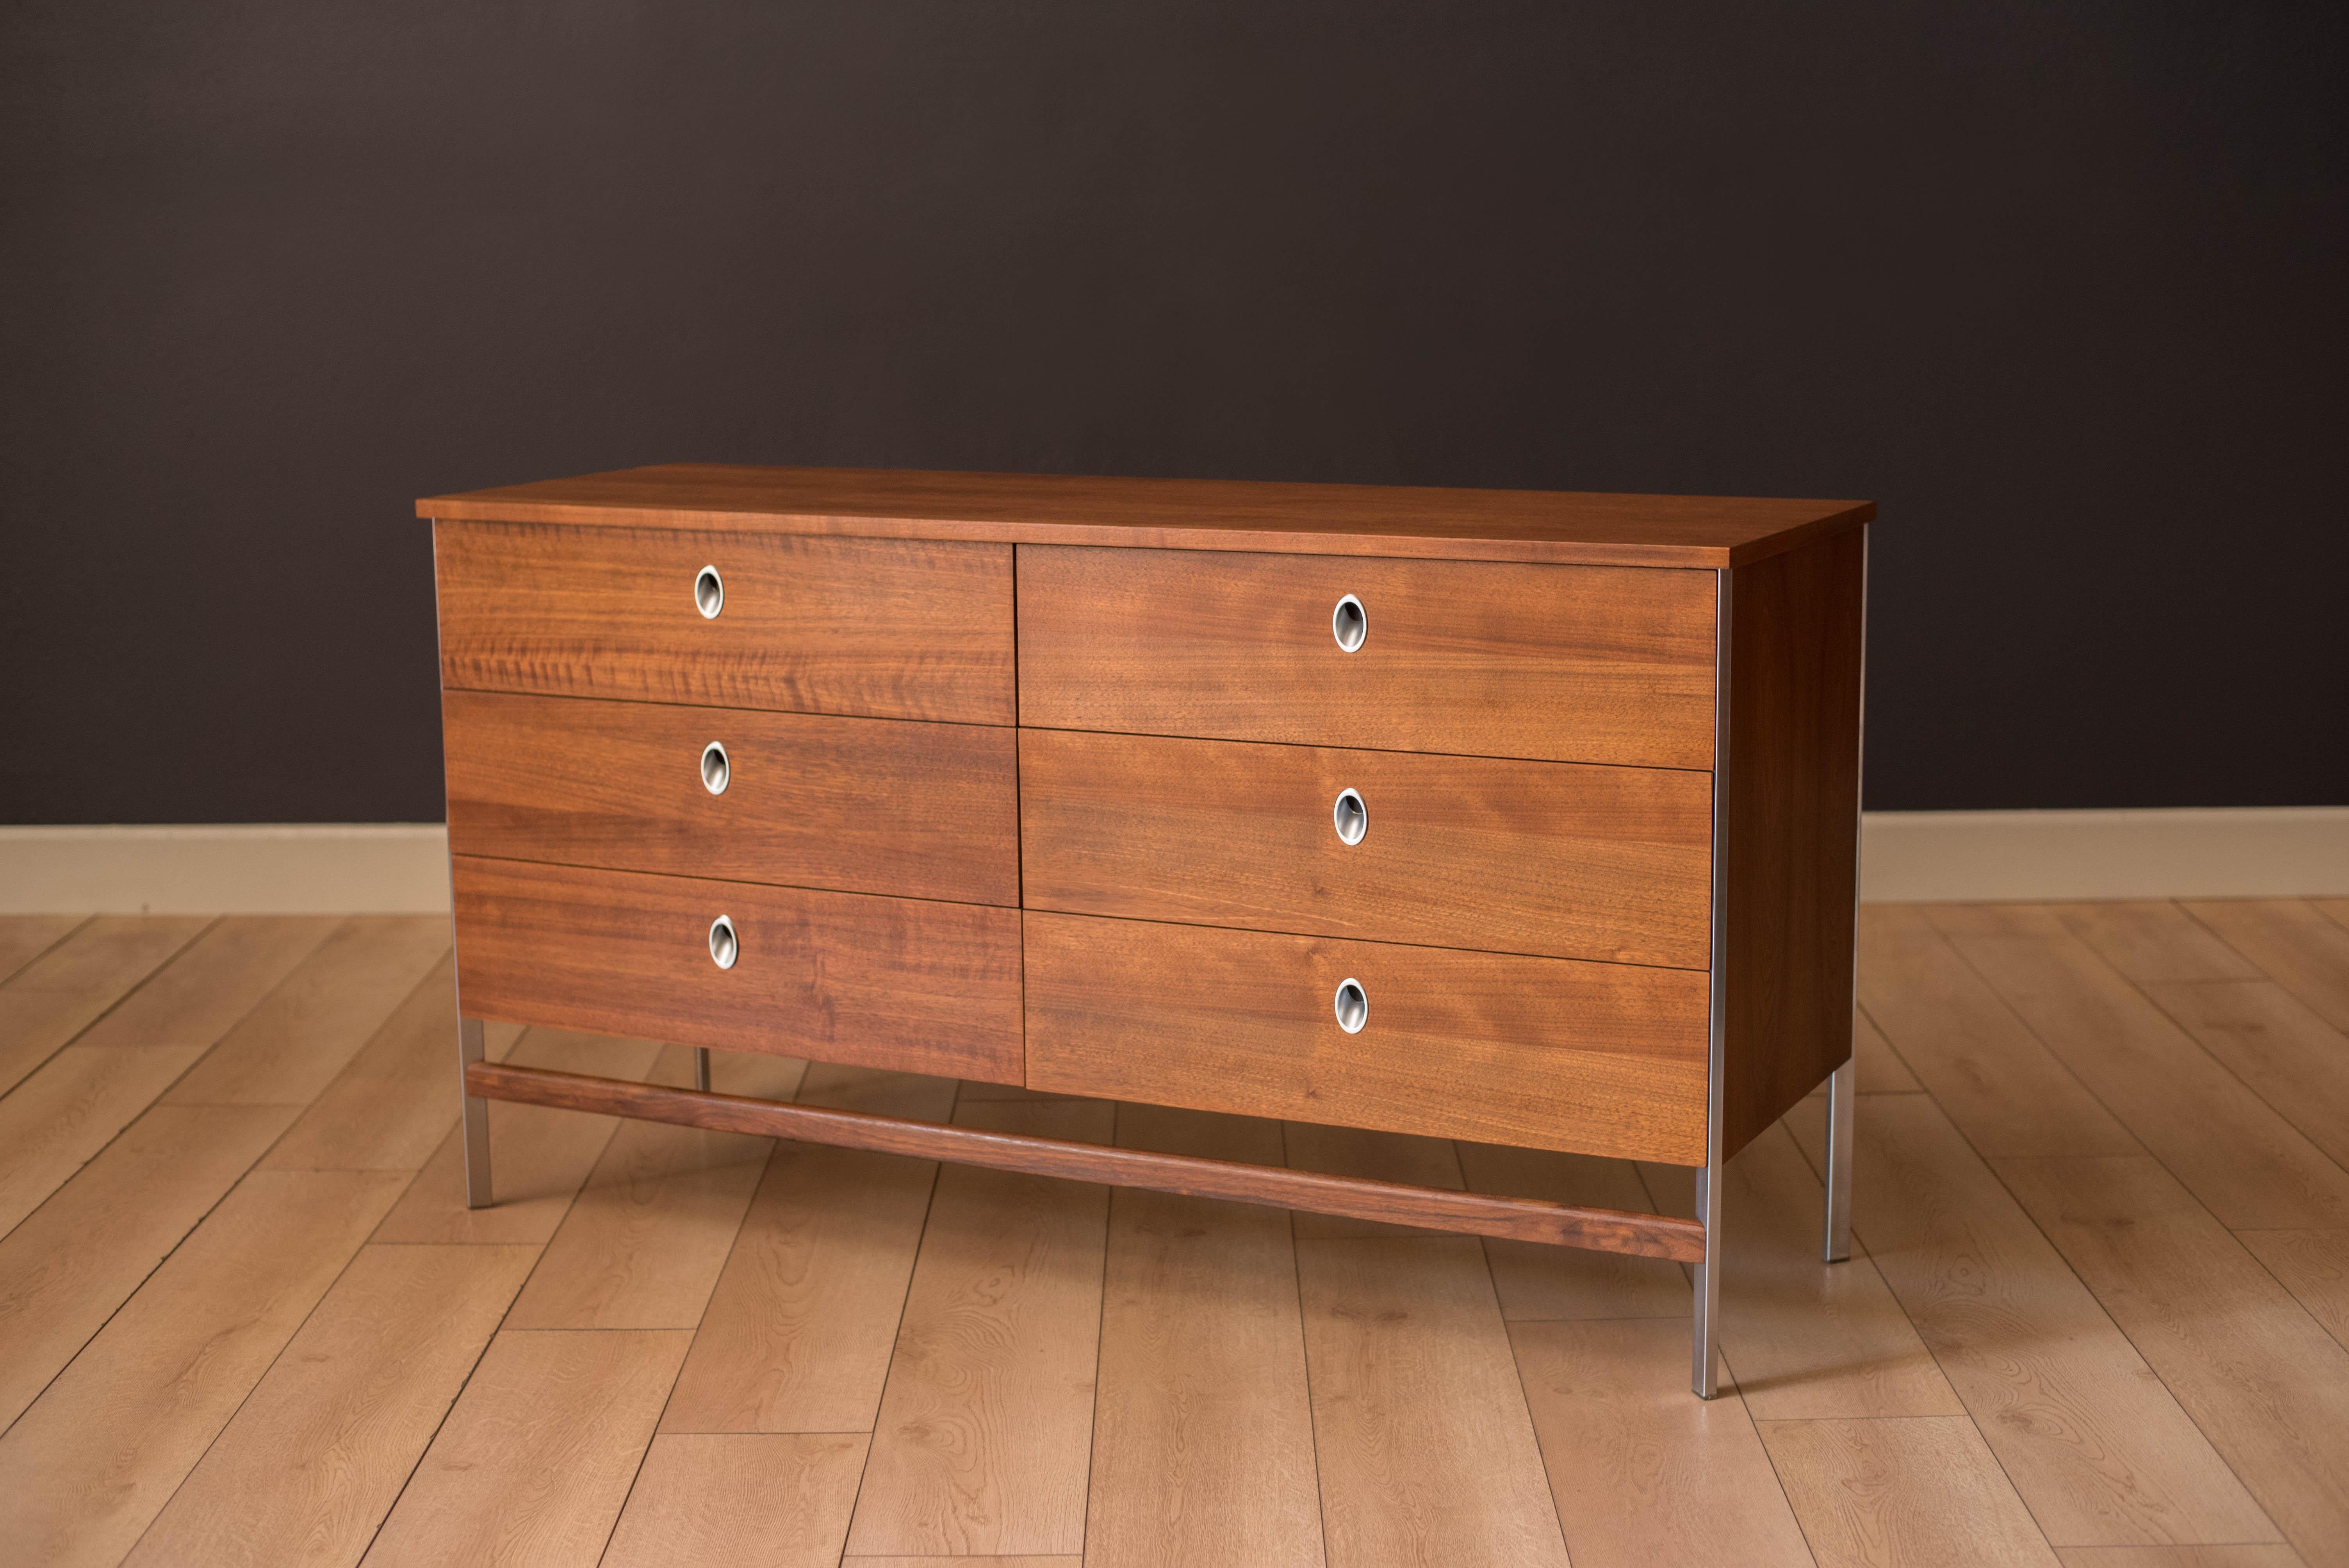 Mid-Century Modern dresser in walnut manufactured by Vista of California circa 1960's. This piece features six storage drawers with unique polished aluminum pulls. Supported by an angular steel frame base finished with a floating walnut crossbar.